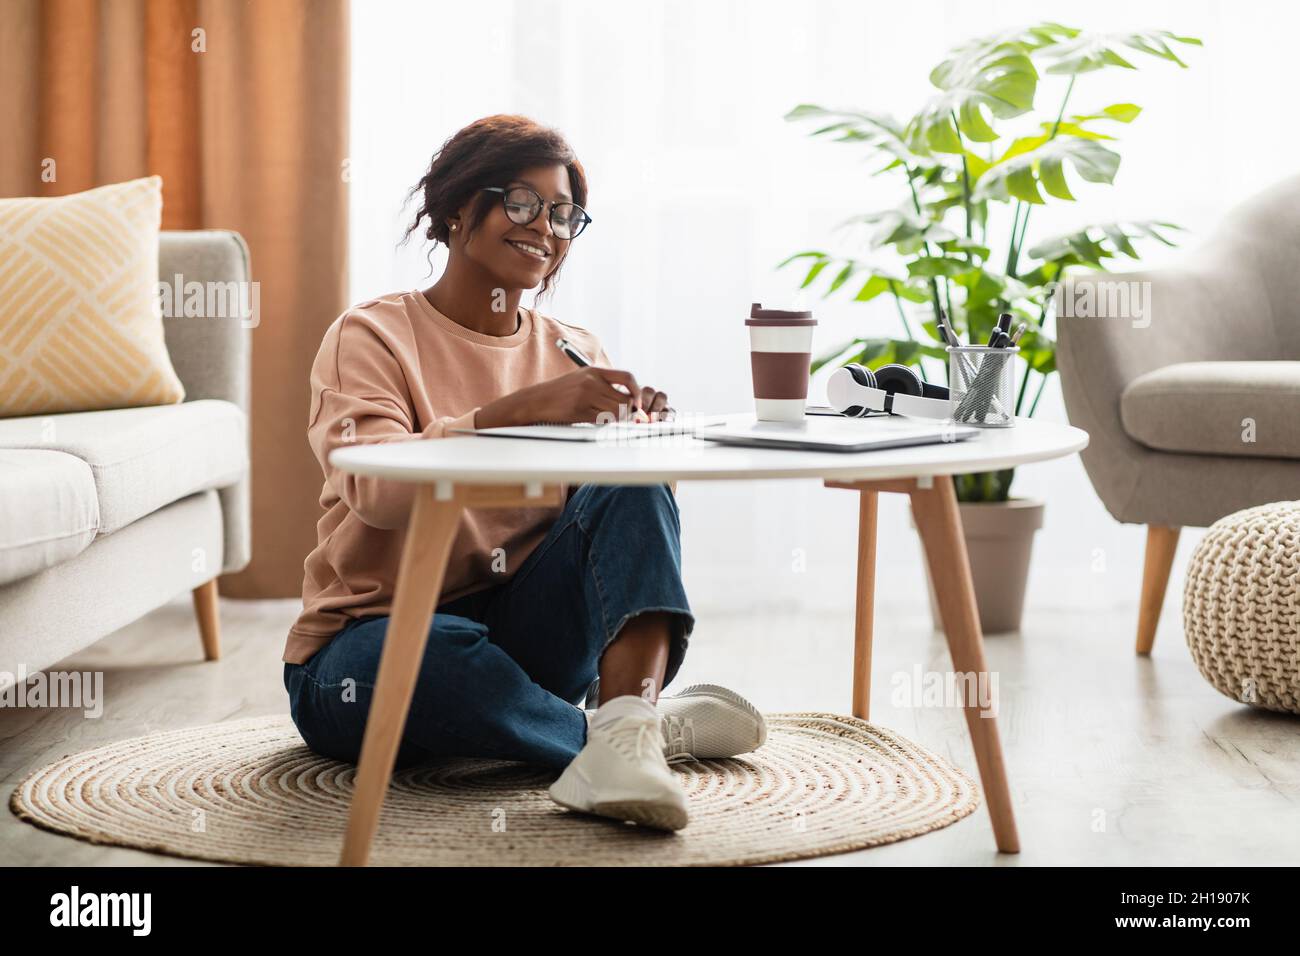 Cheerful Black Millennial Lady Writing Taking Notes Learning At Home Stock Photo